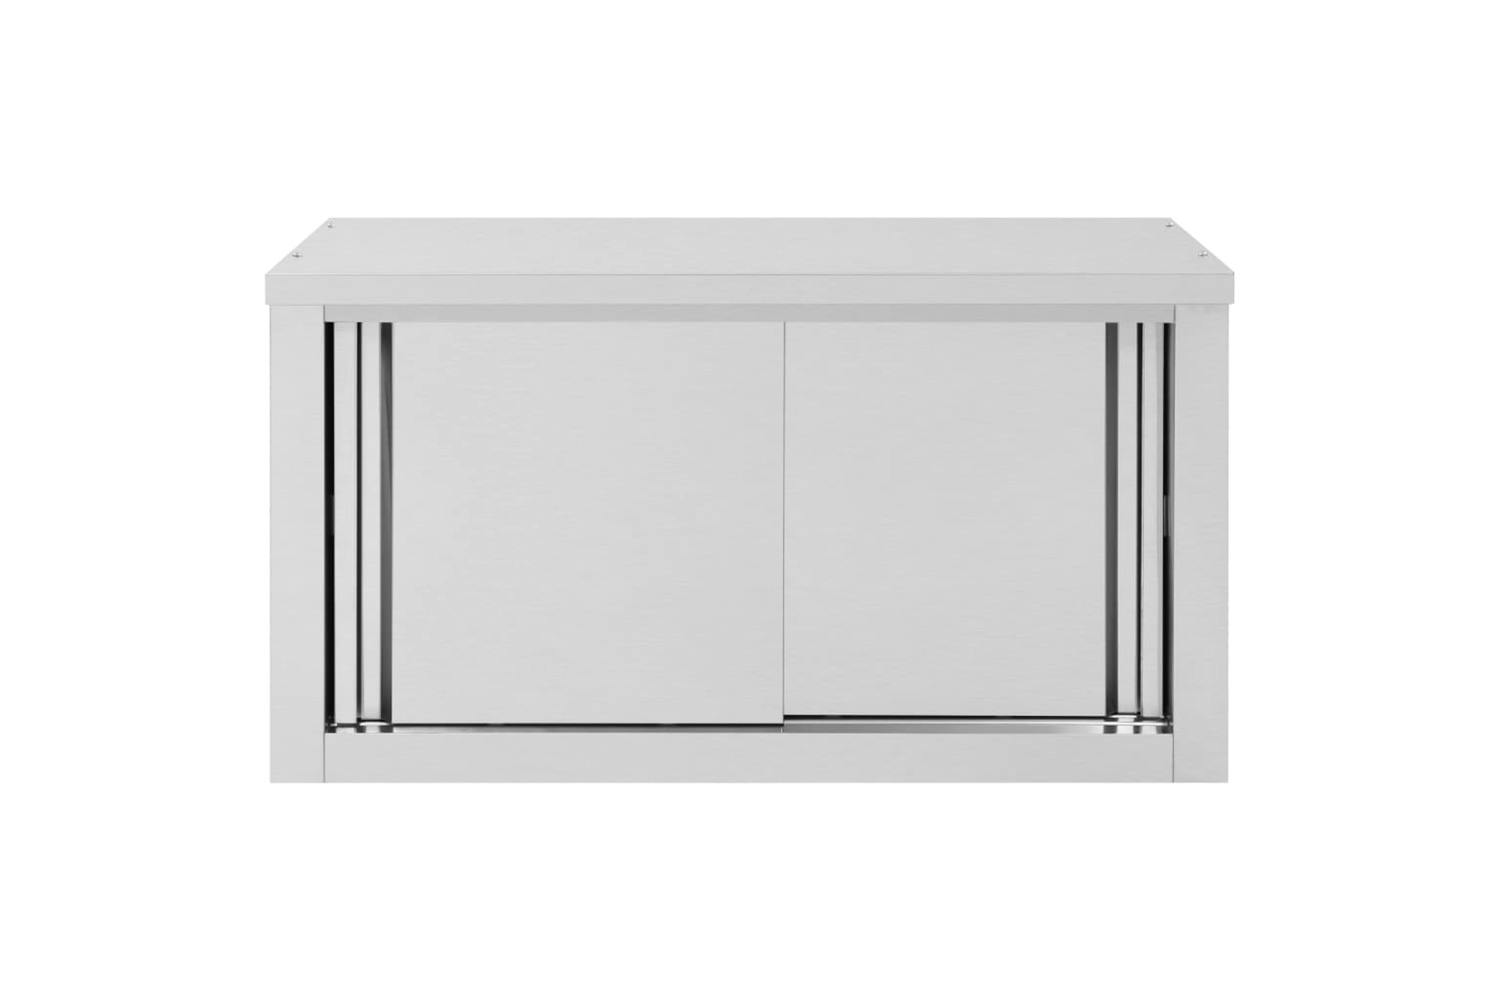 Vidaxl 51052 Kitchen Wall Cabinet With Sliding Doors 90x40x50 Cm Stainless Steel